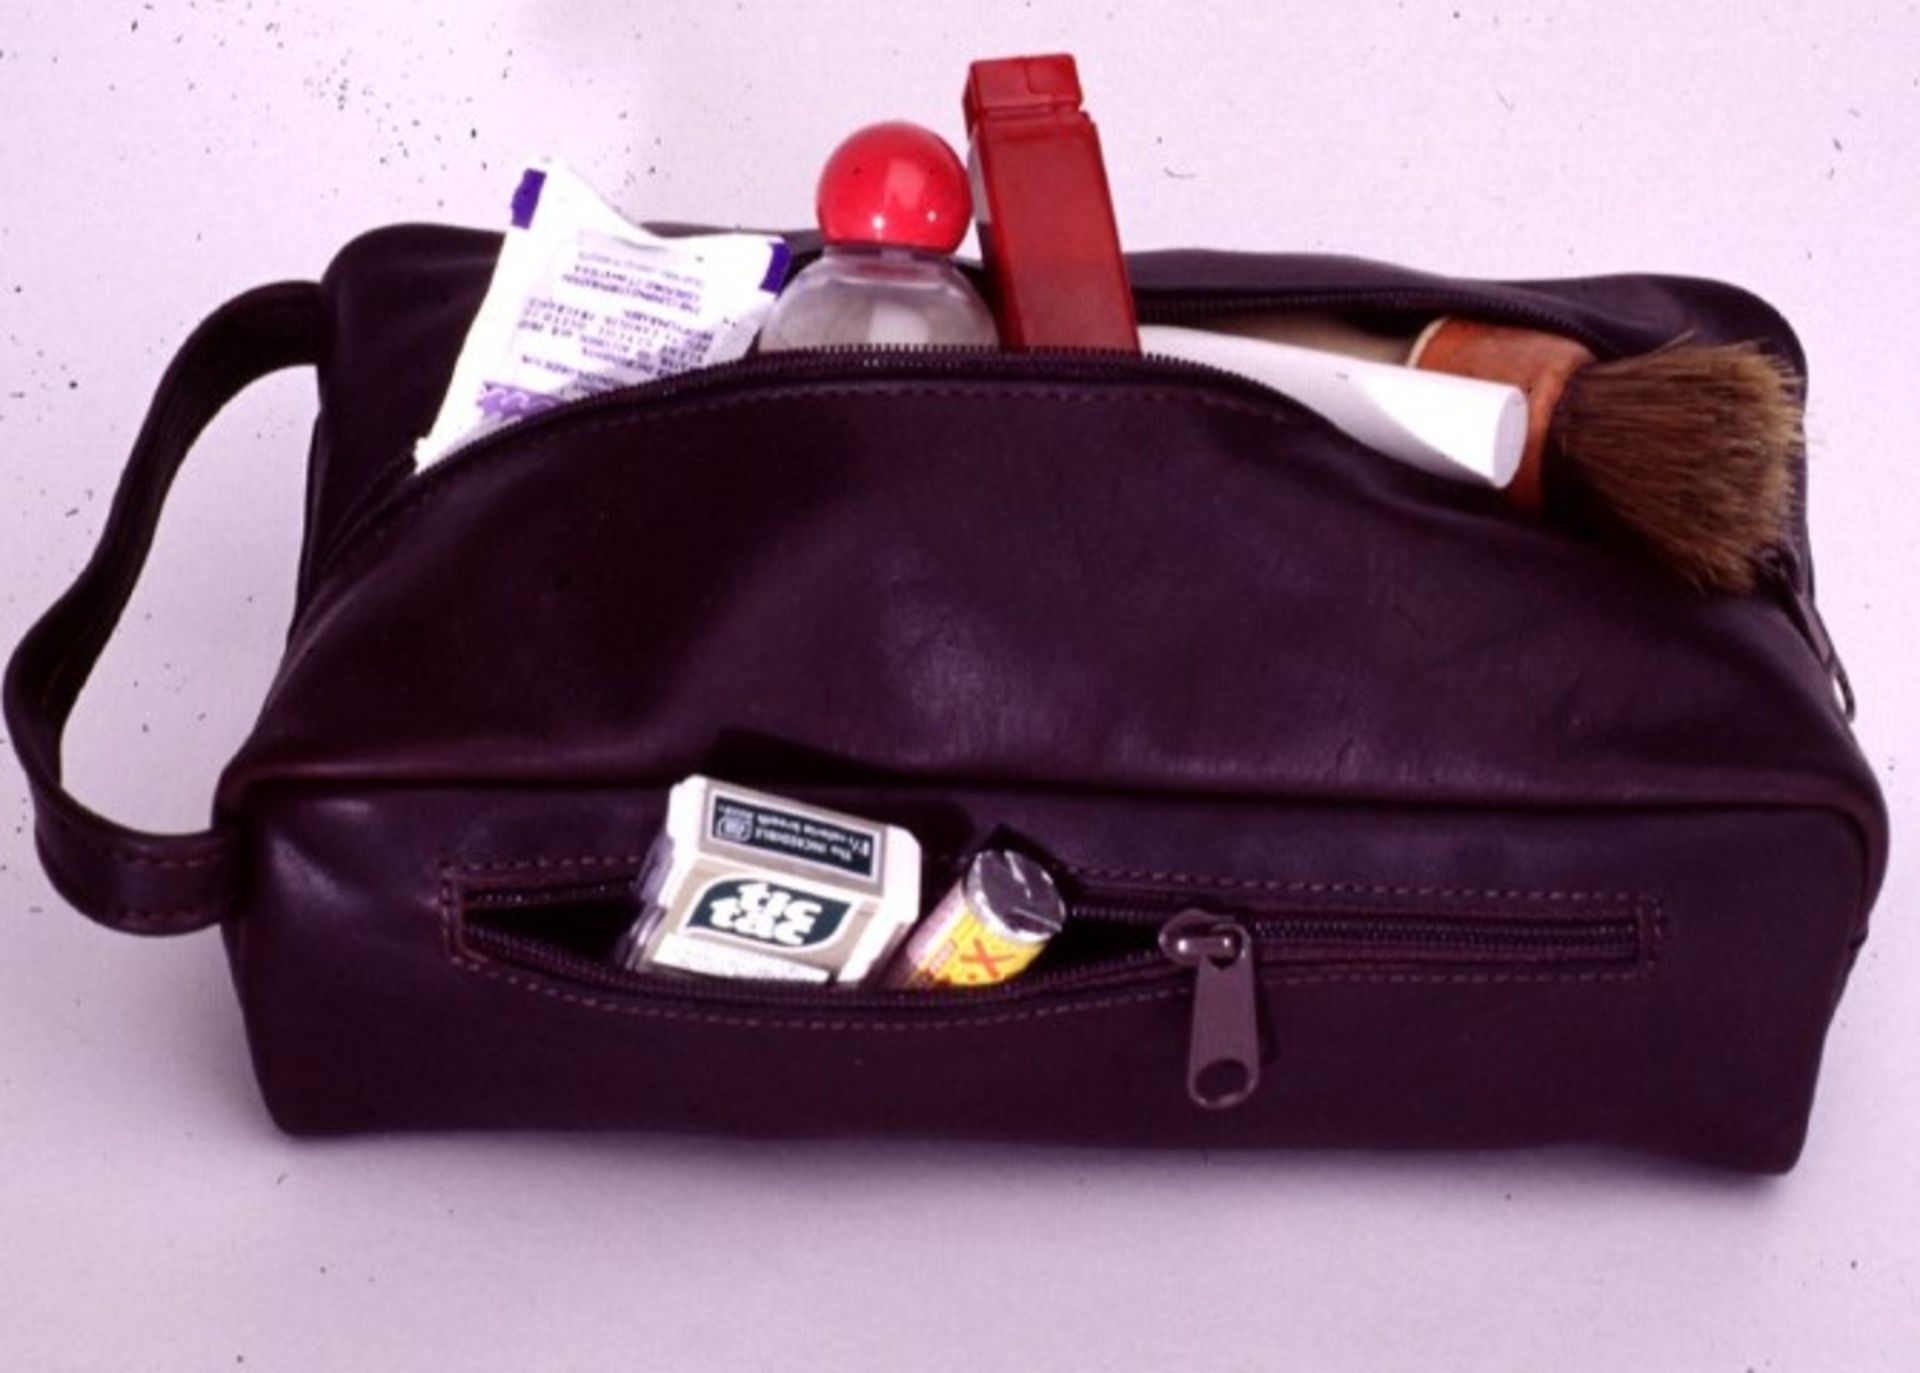 (6) Full grain cowhide travel kit with handle, top & side zipper pockets, folded edges.